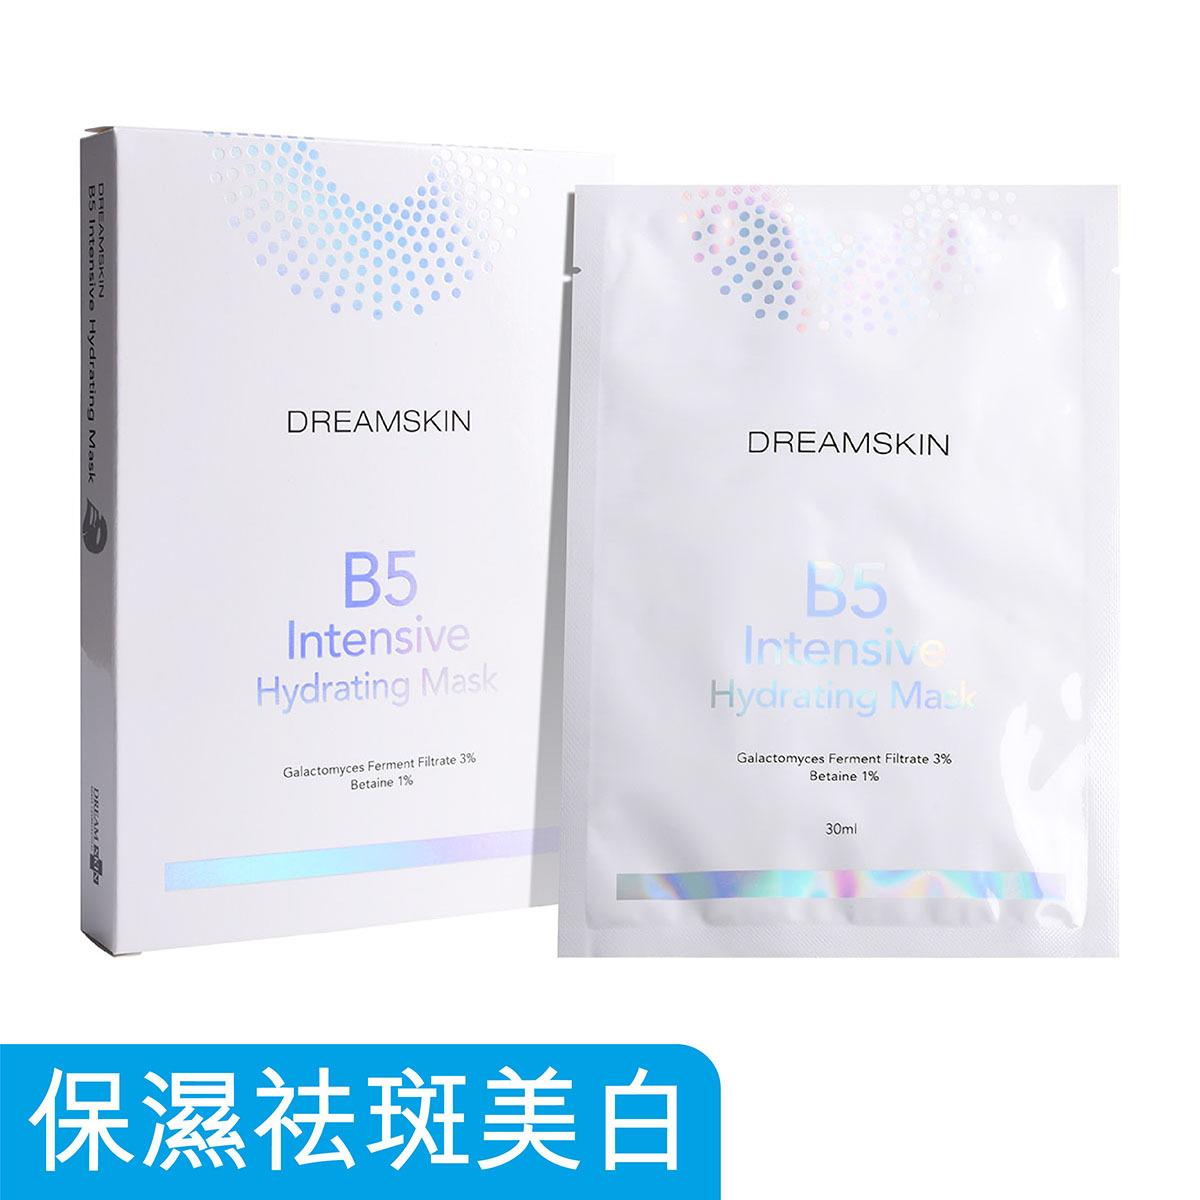 1 SET 韓國 維他命B5保濕面膜｜Galactomyces Ferment Filtrate 3%, Betaine 1%, Microcell 40 (30ml x 5 pcs)